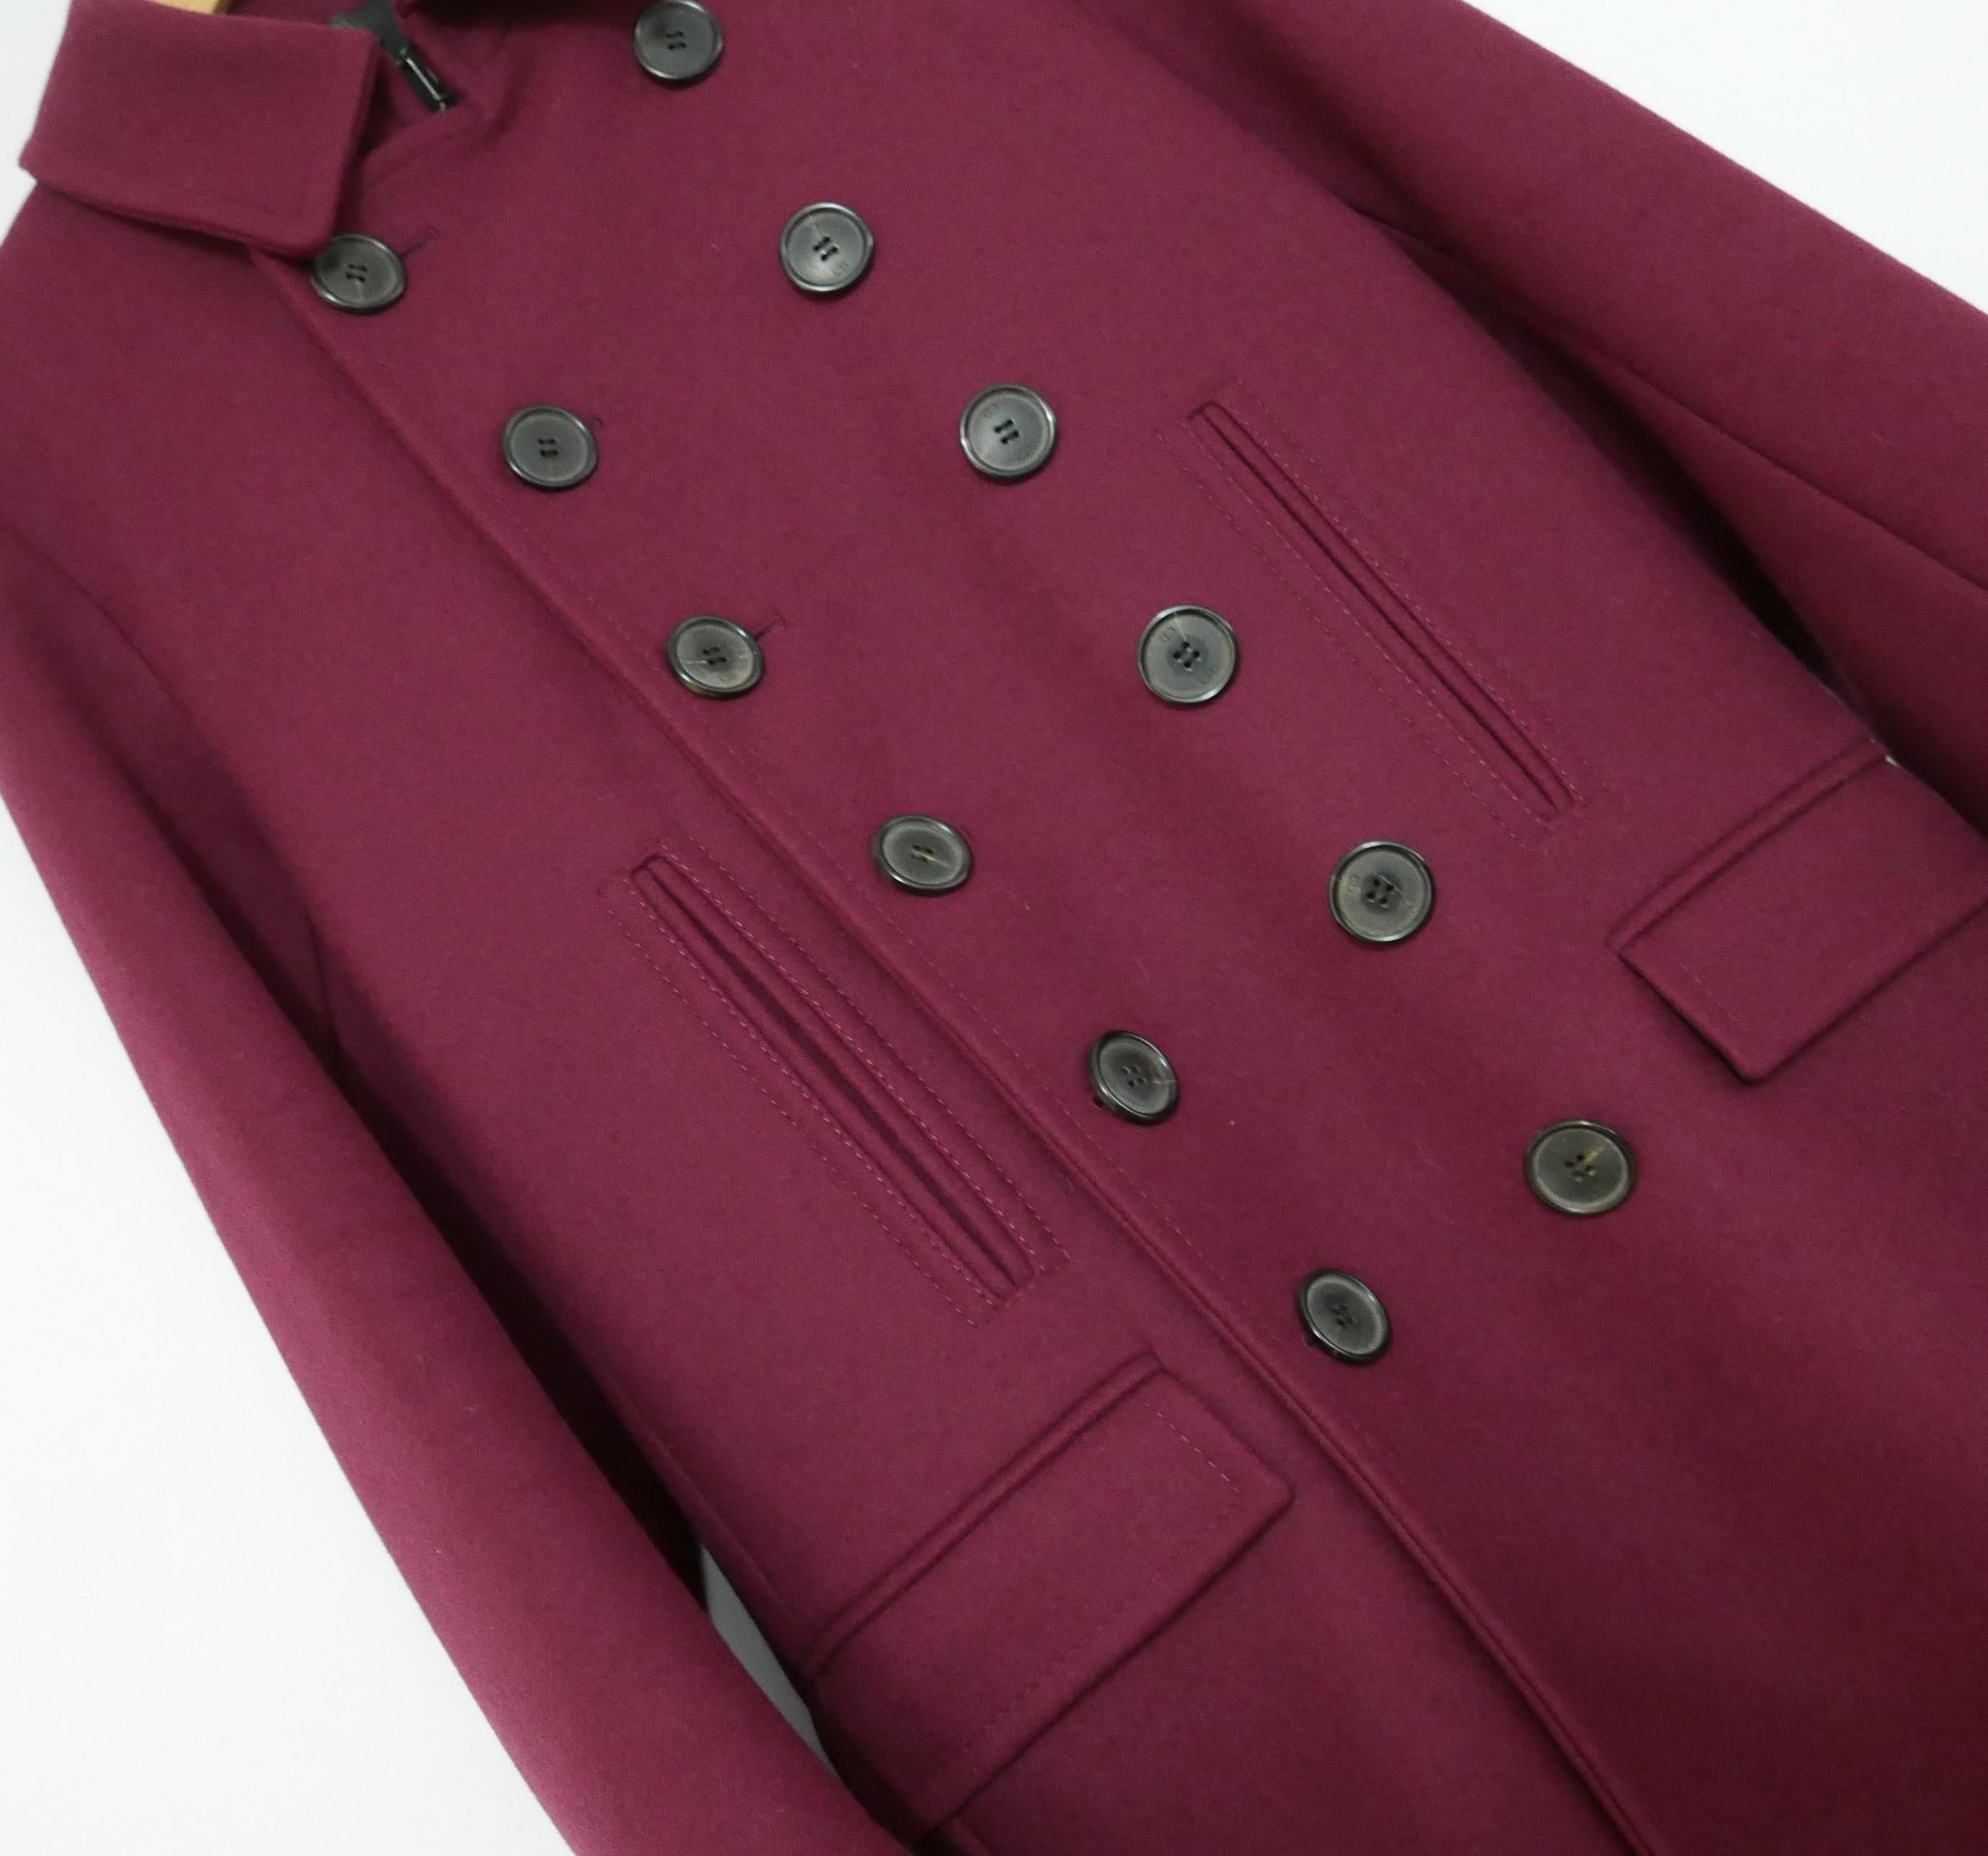 Superbly crafted, luxe coat from the Dior Homme Fall 2013 Collection. Bought for over £2500 and unworn. Made from heavy, thick burgundy wool with a black satin lining. It has a sleek lined breasted front with large CD etched buttons, hook front